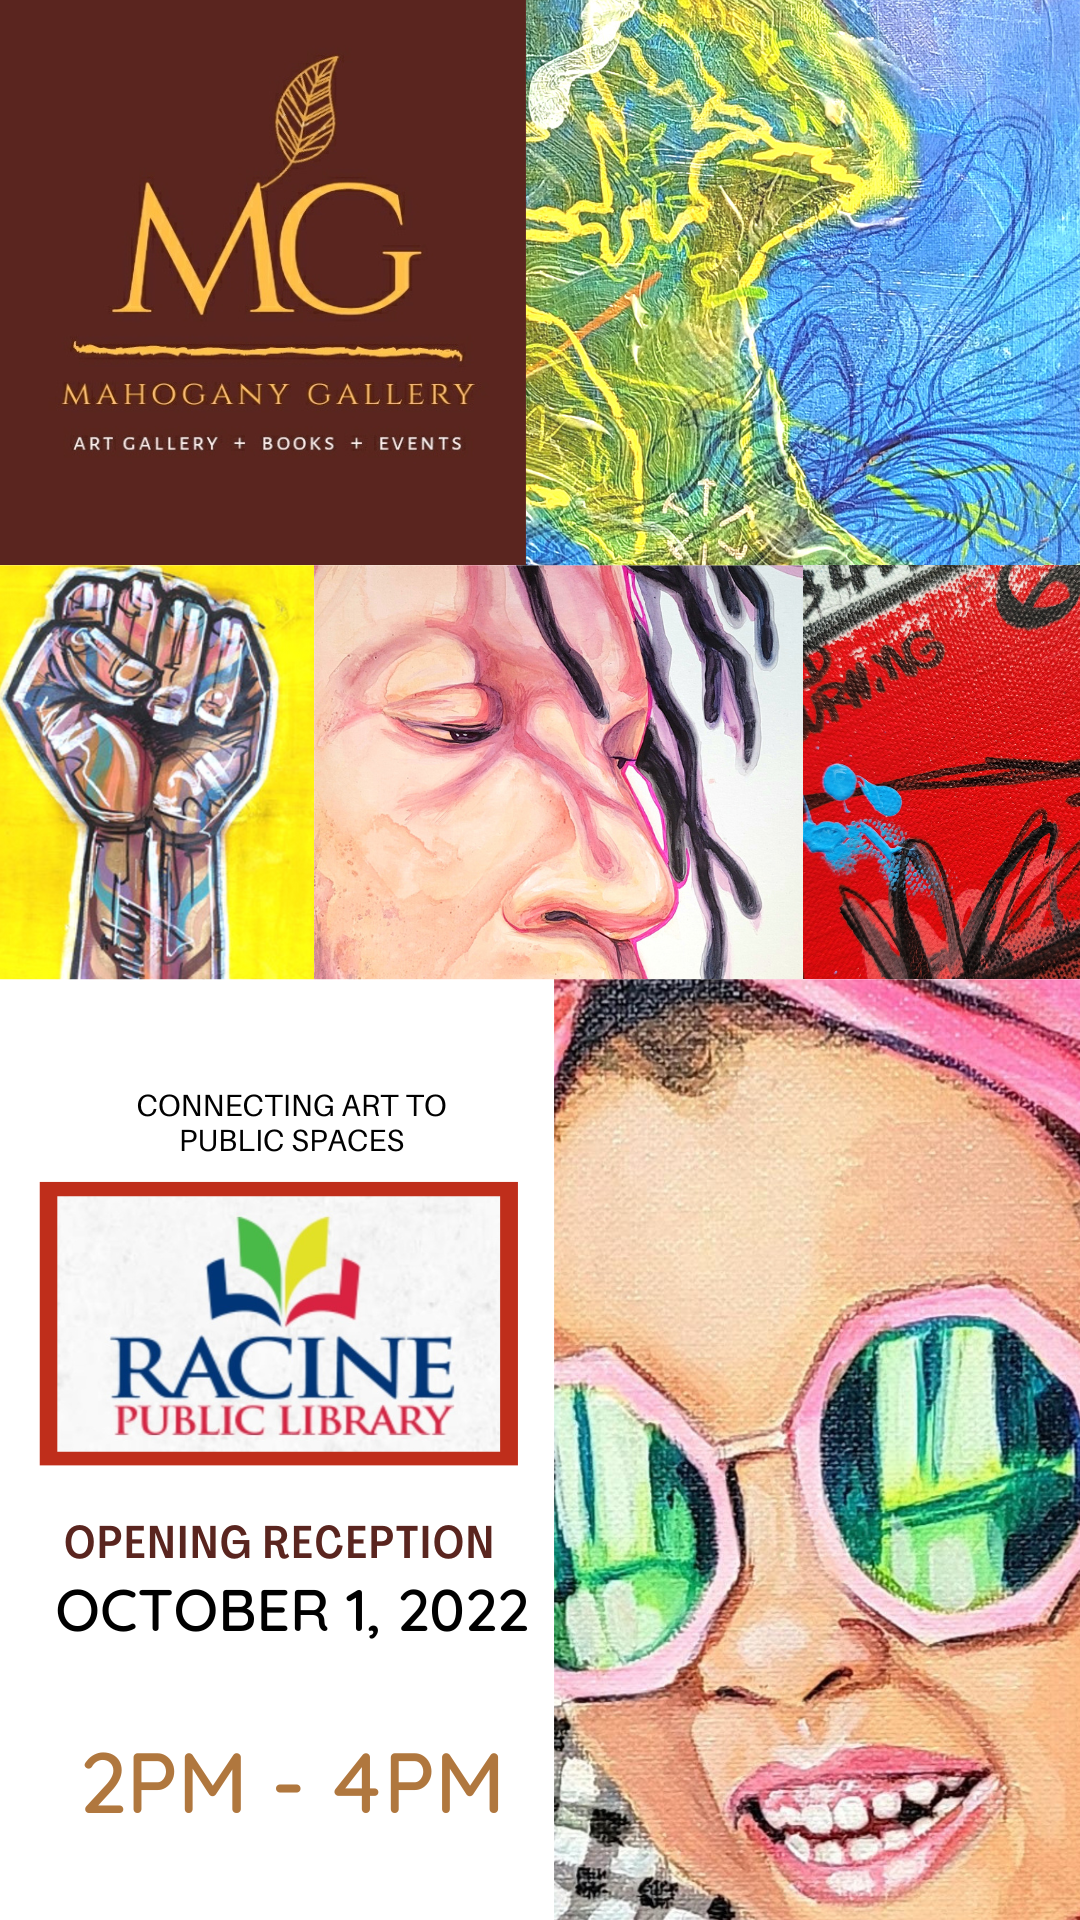 Mahogany Gallery art gallery + books + events. Connecting art to public spaces. Racine Public Library. Opening reception - October 1, 2022. 2-4pm.